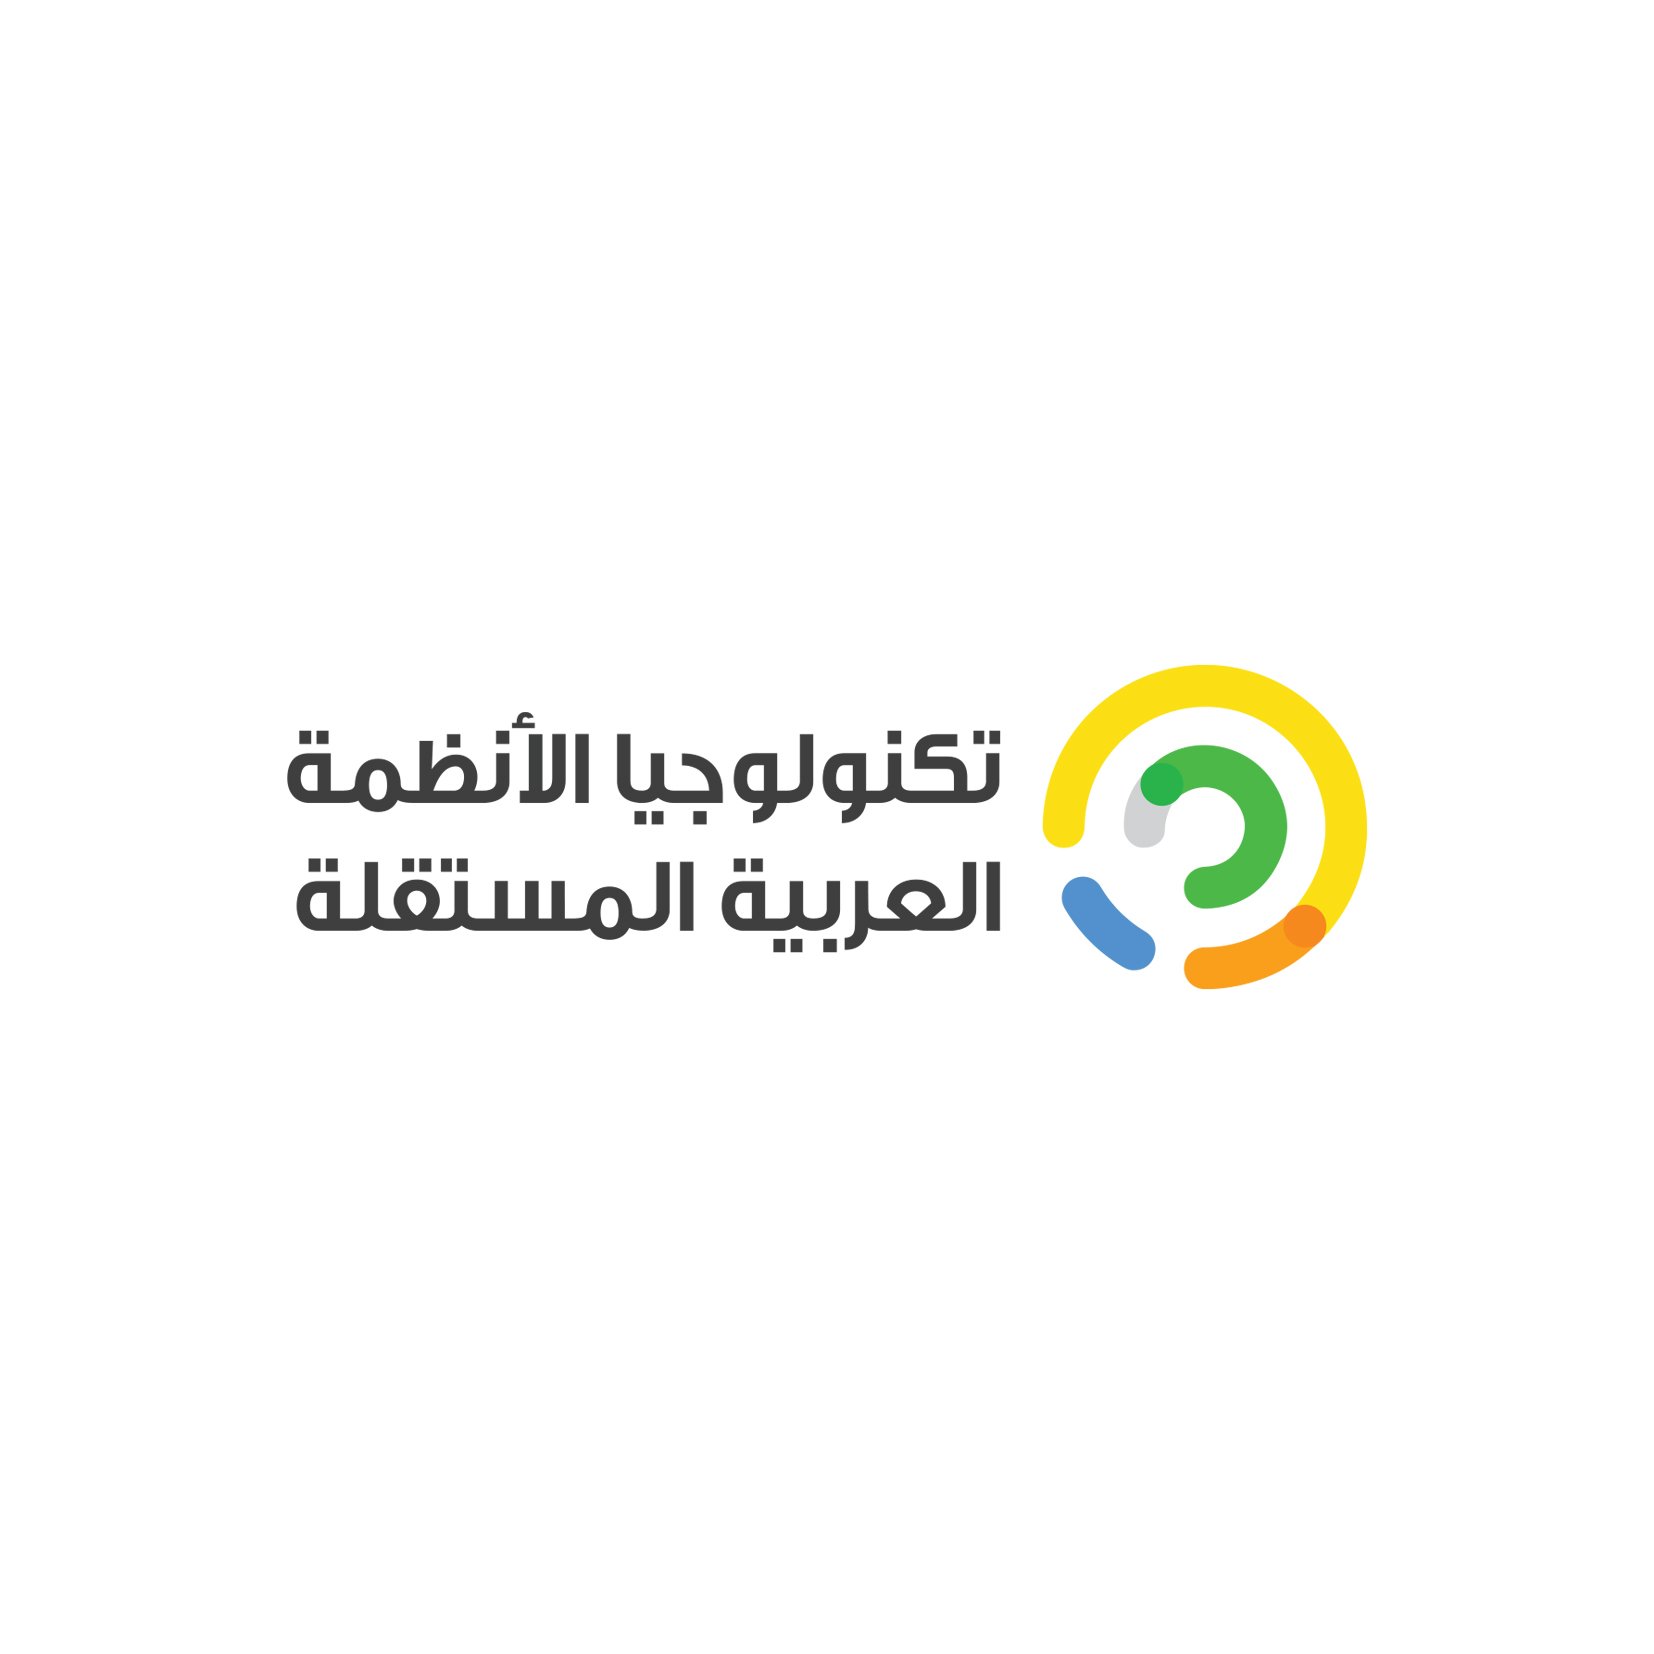 Launching the new identity for the technology of independent Arab systems